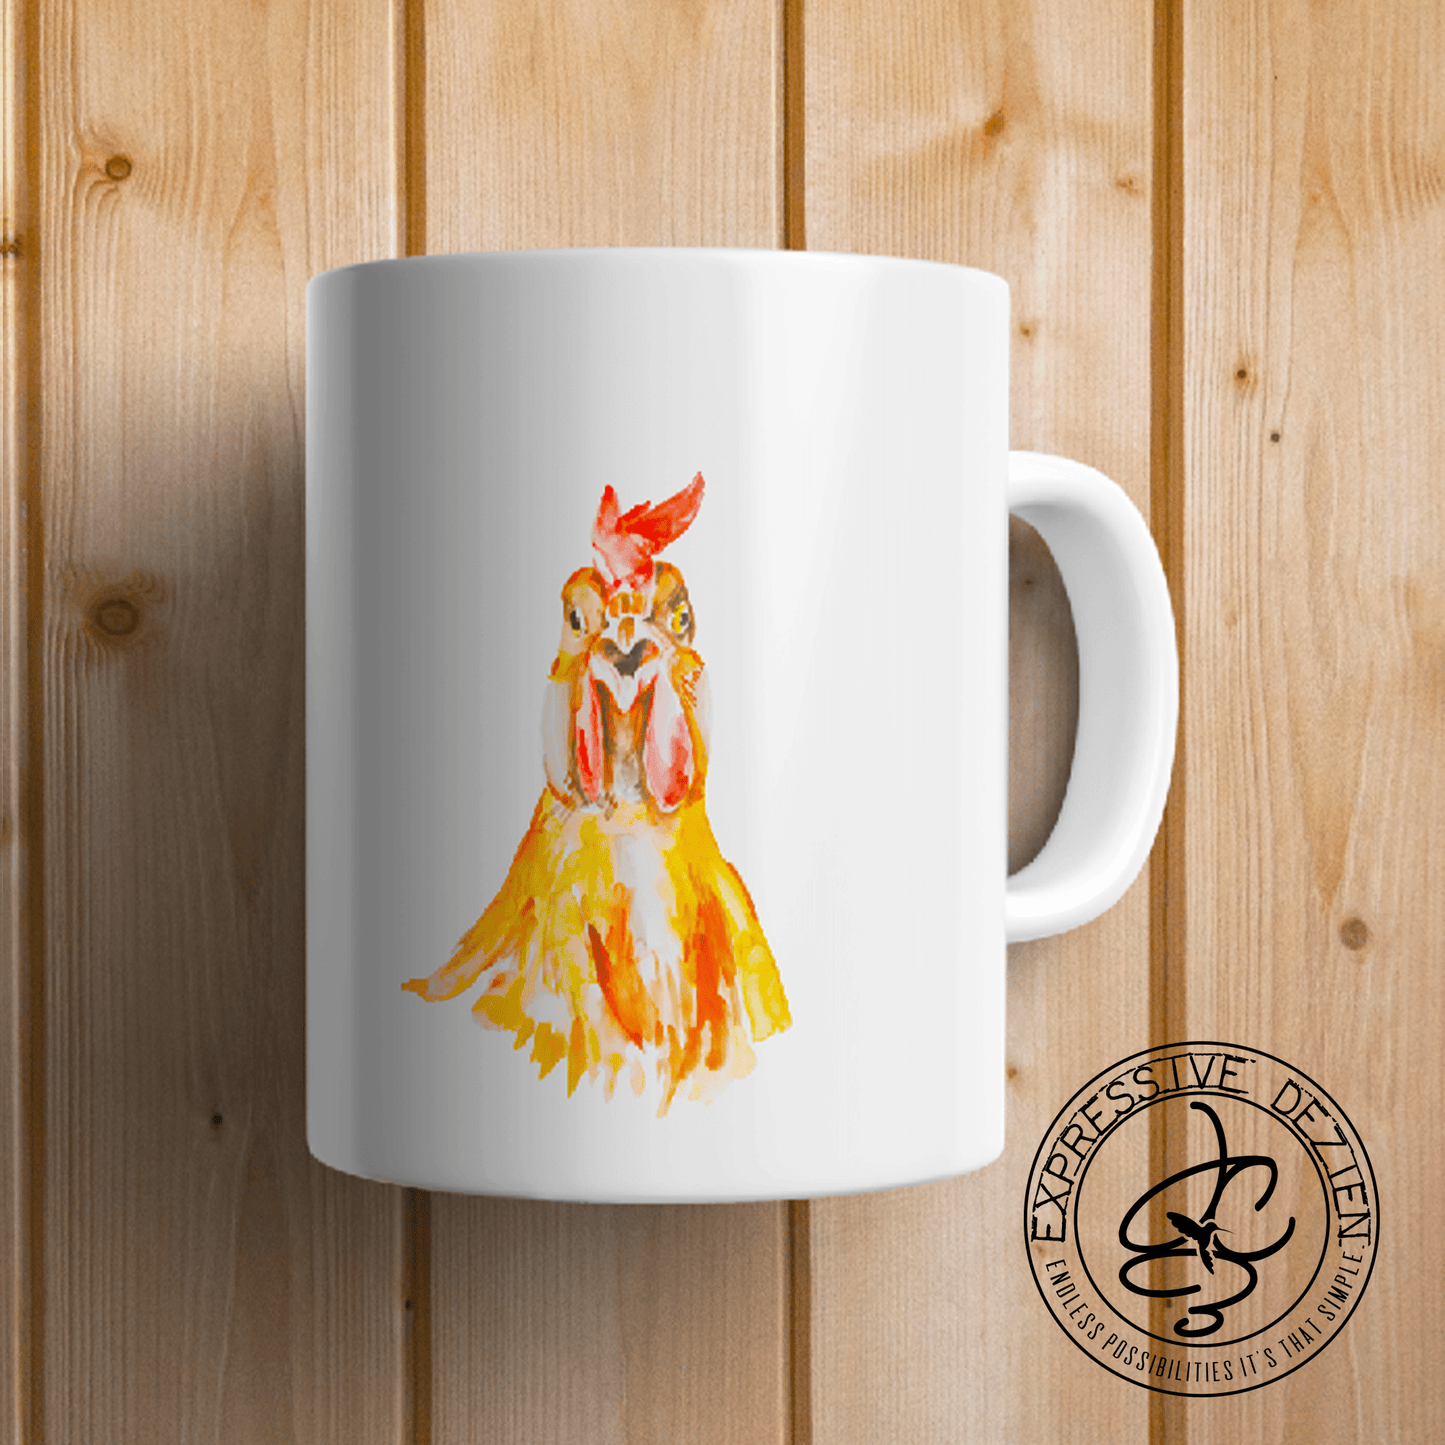 Coffee! Did Someone say Coffee 15oz. Rooster Mug - Expressive DeZien 